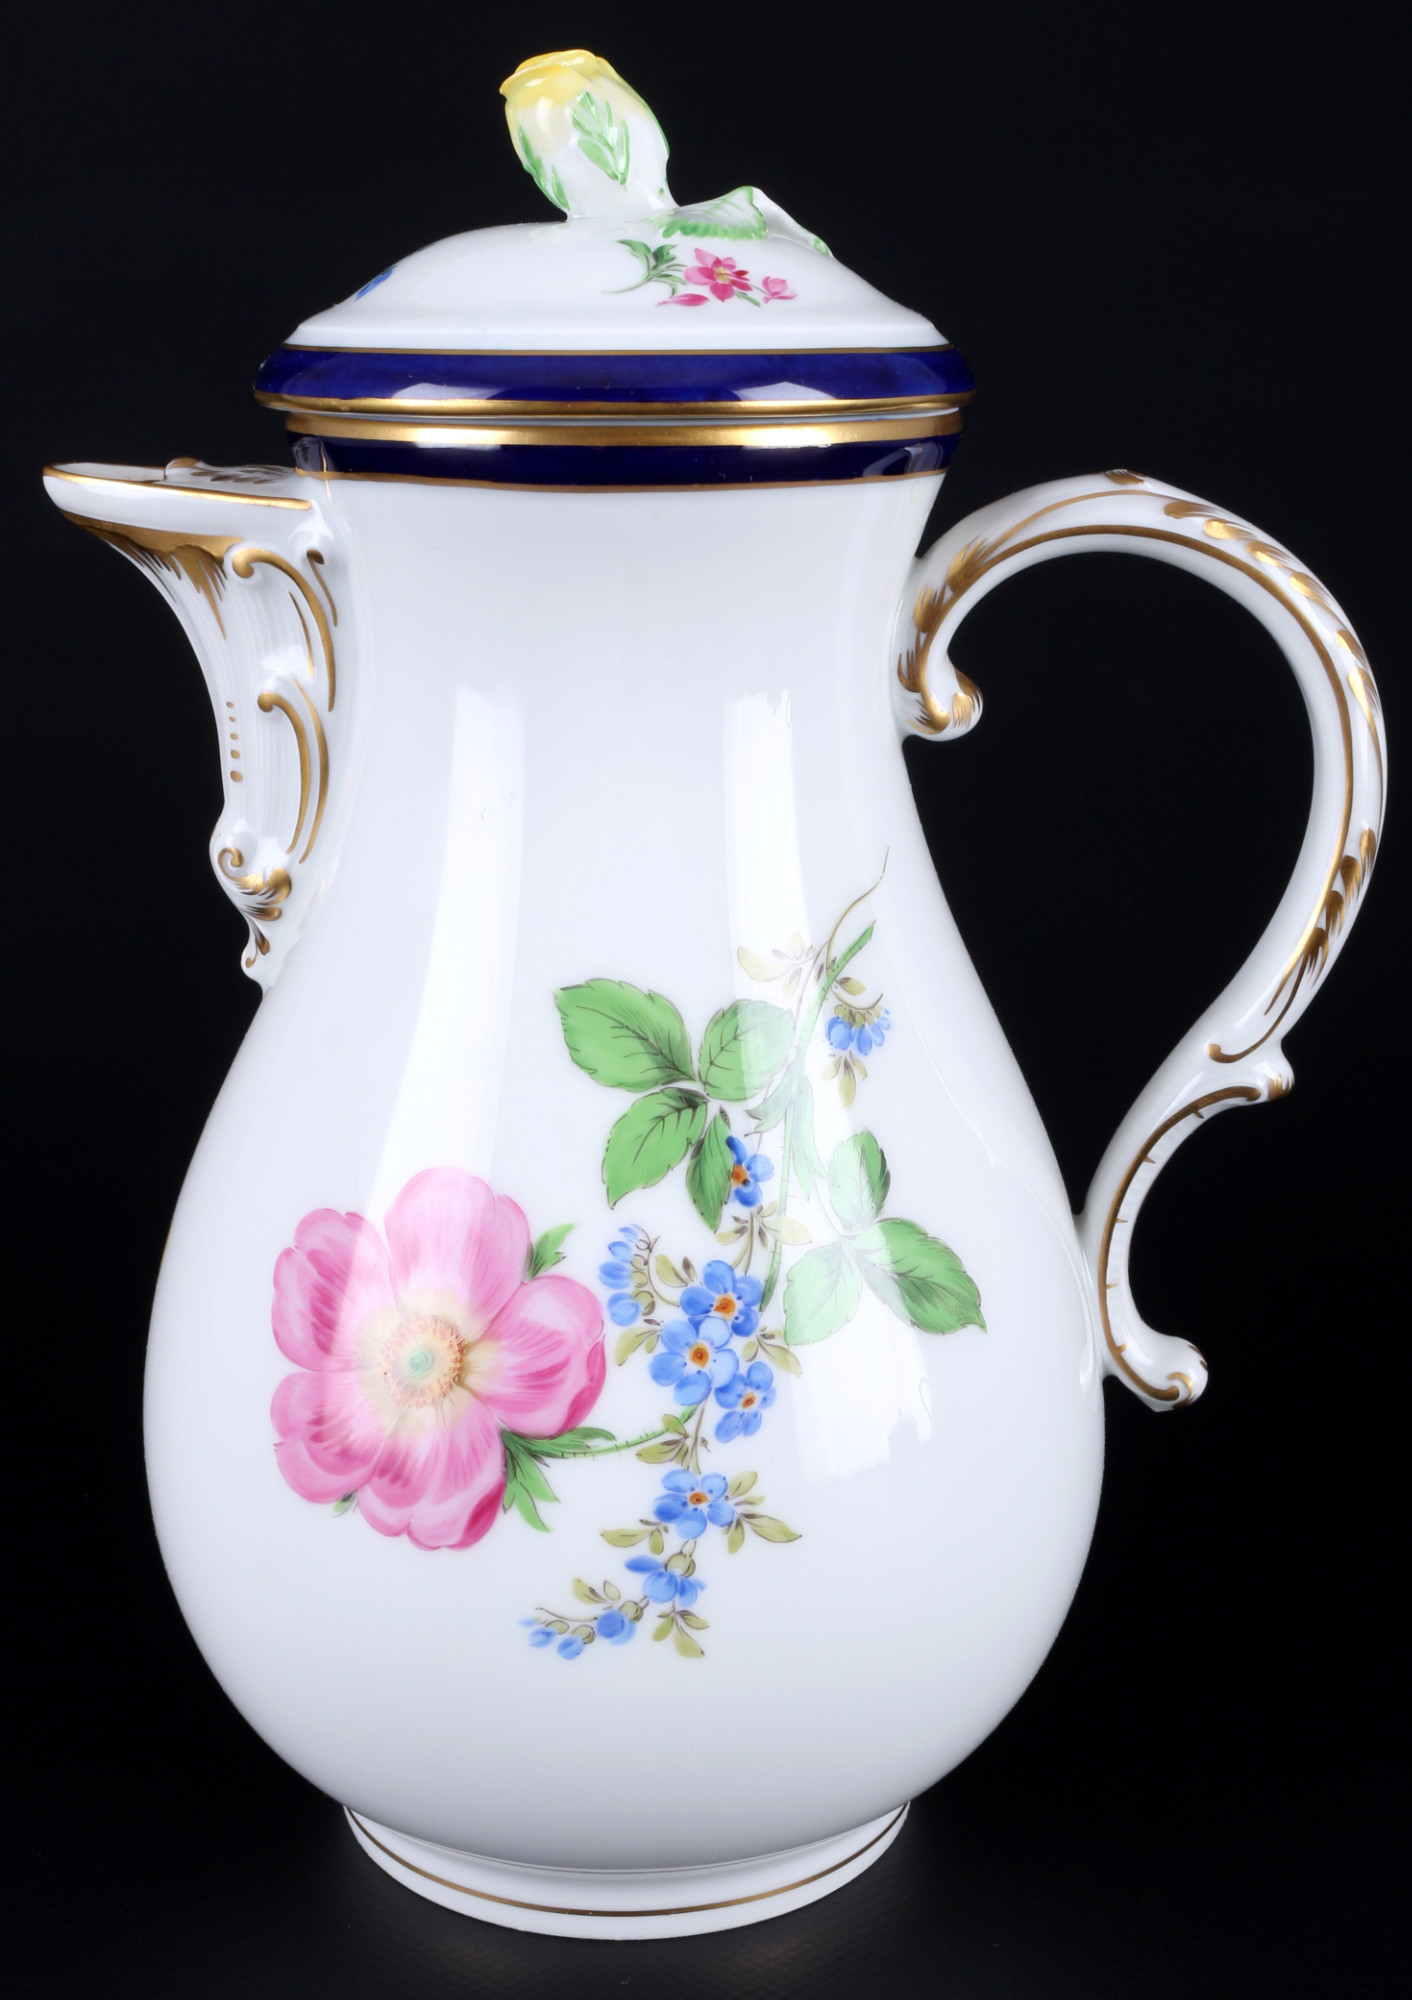 Meissen Flowers with Royal Blue Rim coffee service for 6 persons, Kaffeeservice für 6 Personen, - Image 4 of 6